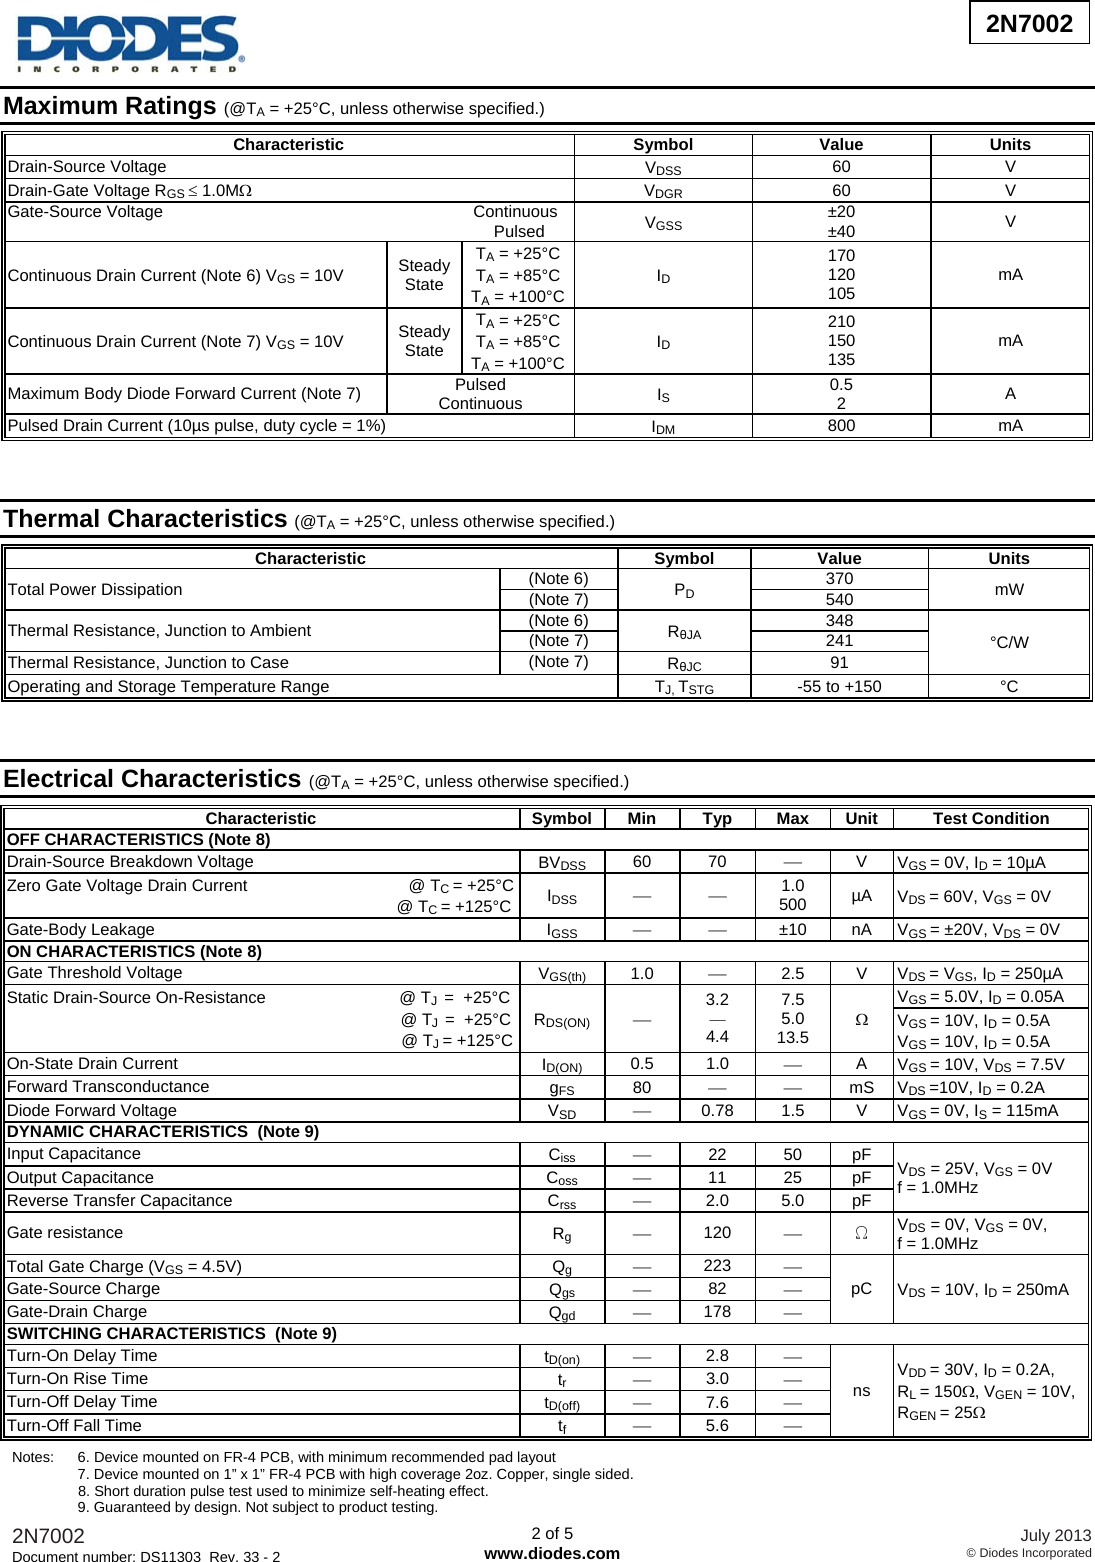 Page 2 of 6 - 2N7002 - Datasheet. Www.s-manuals.com. Diodes